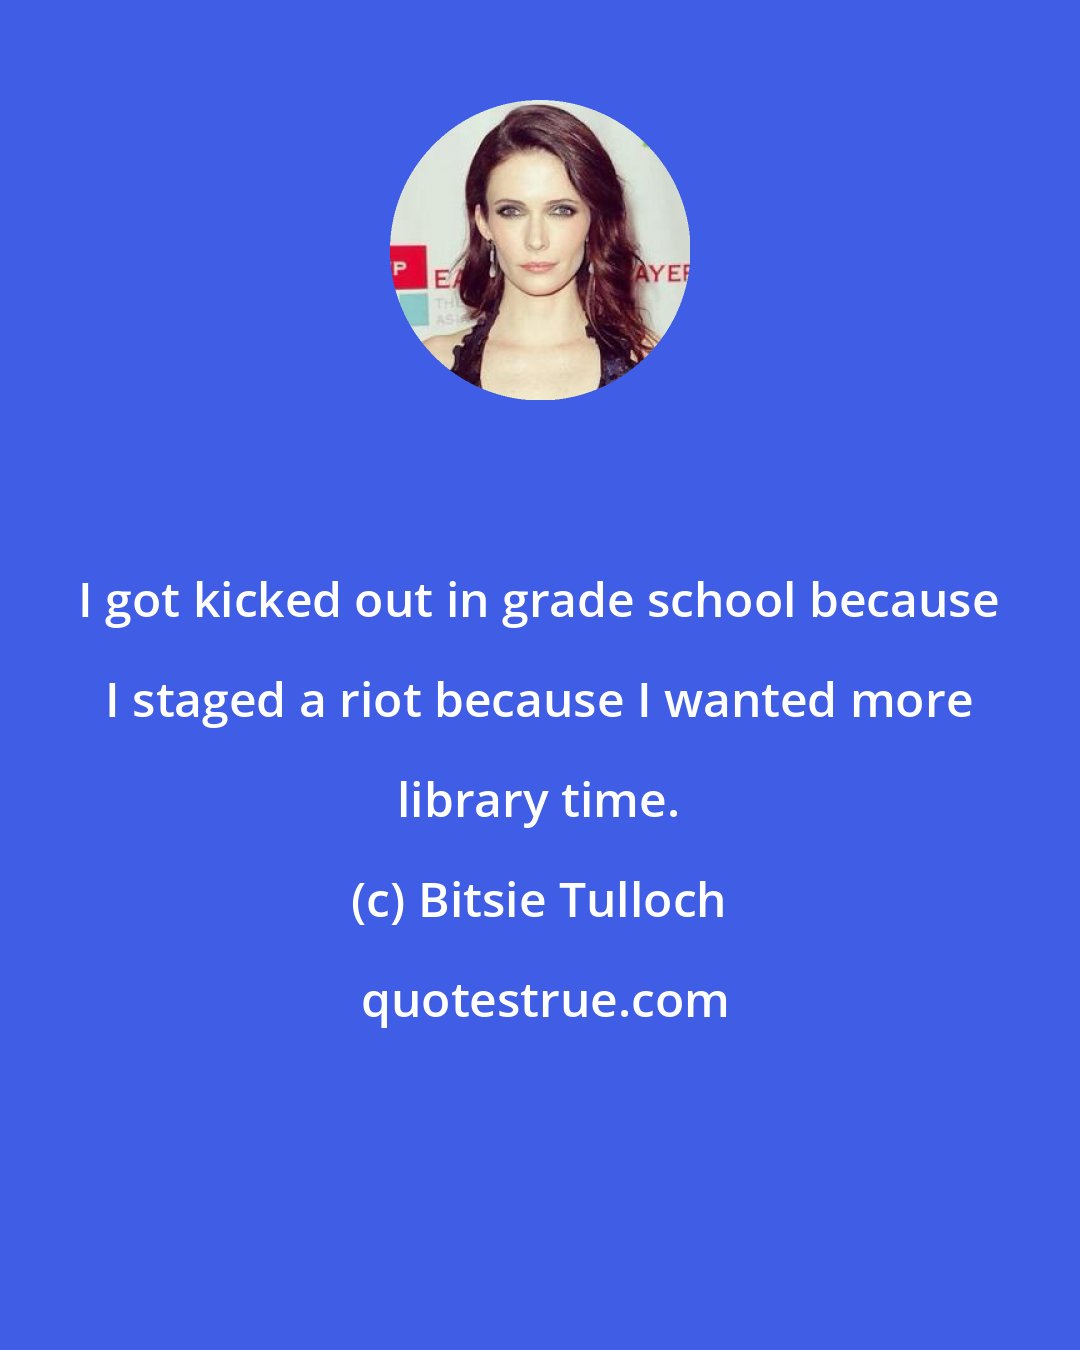 Bitsie Tulloch: I got kicked out in grade school because I staged a riot because I wanted more library time.